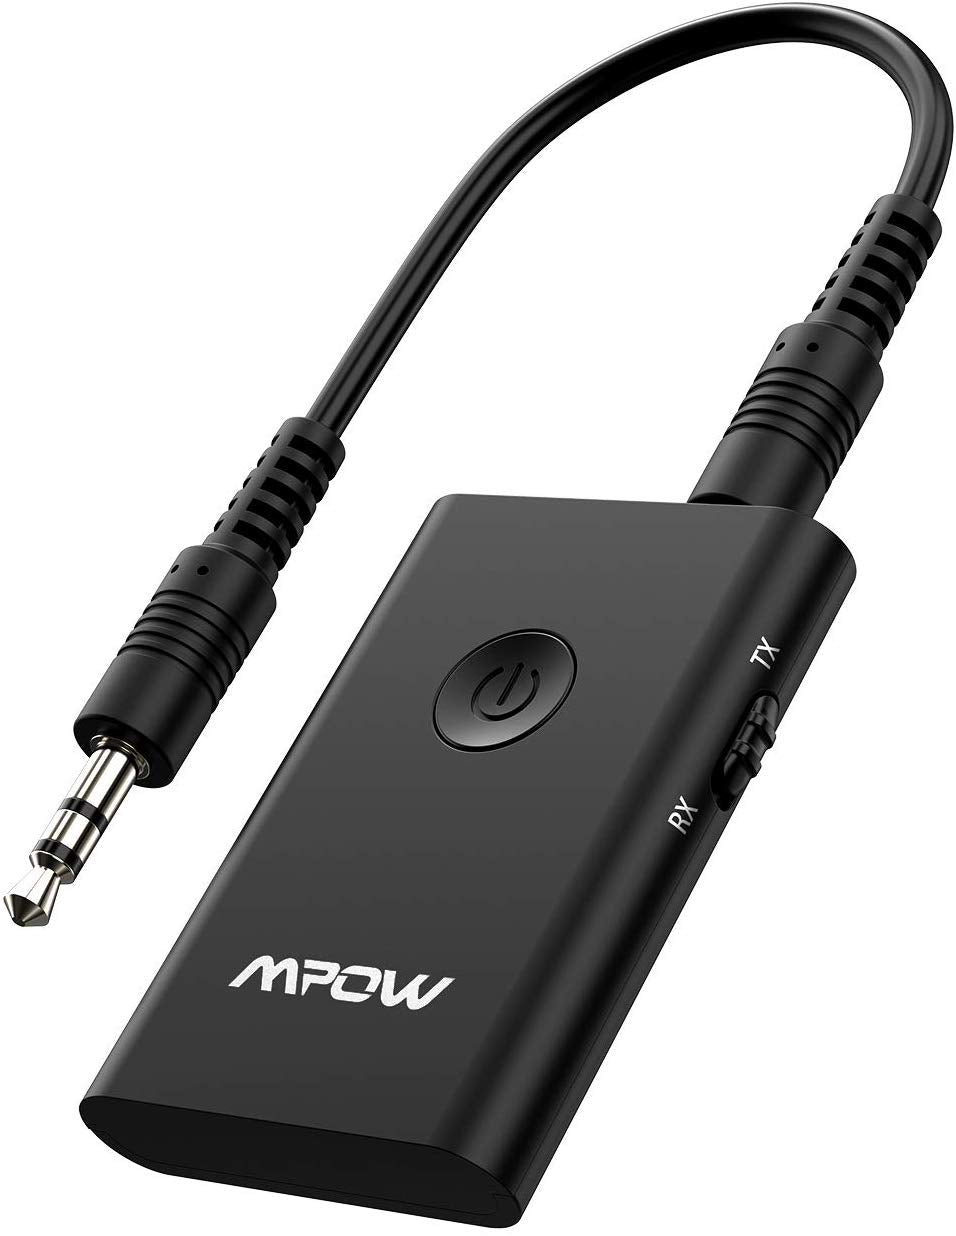 Mpow MPBH390AB Bluetooth receiver and transmitter